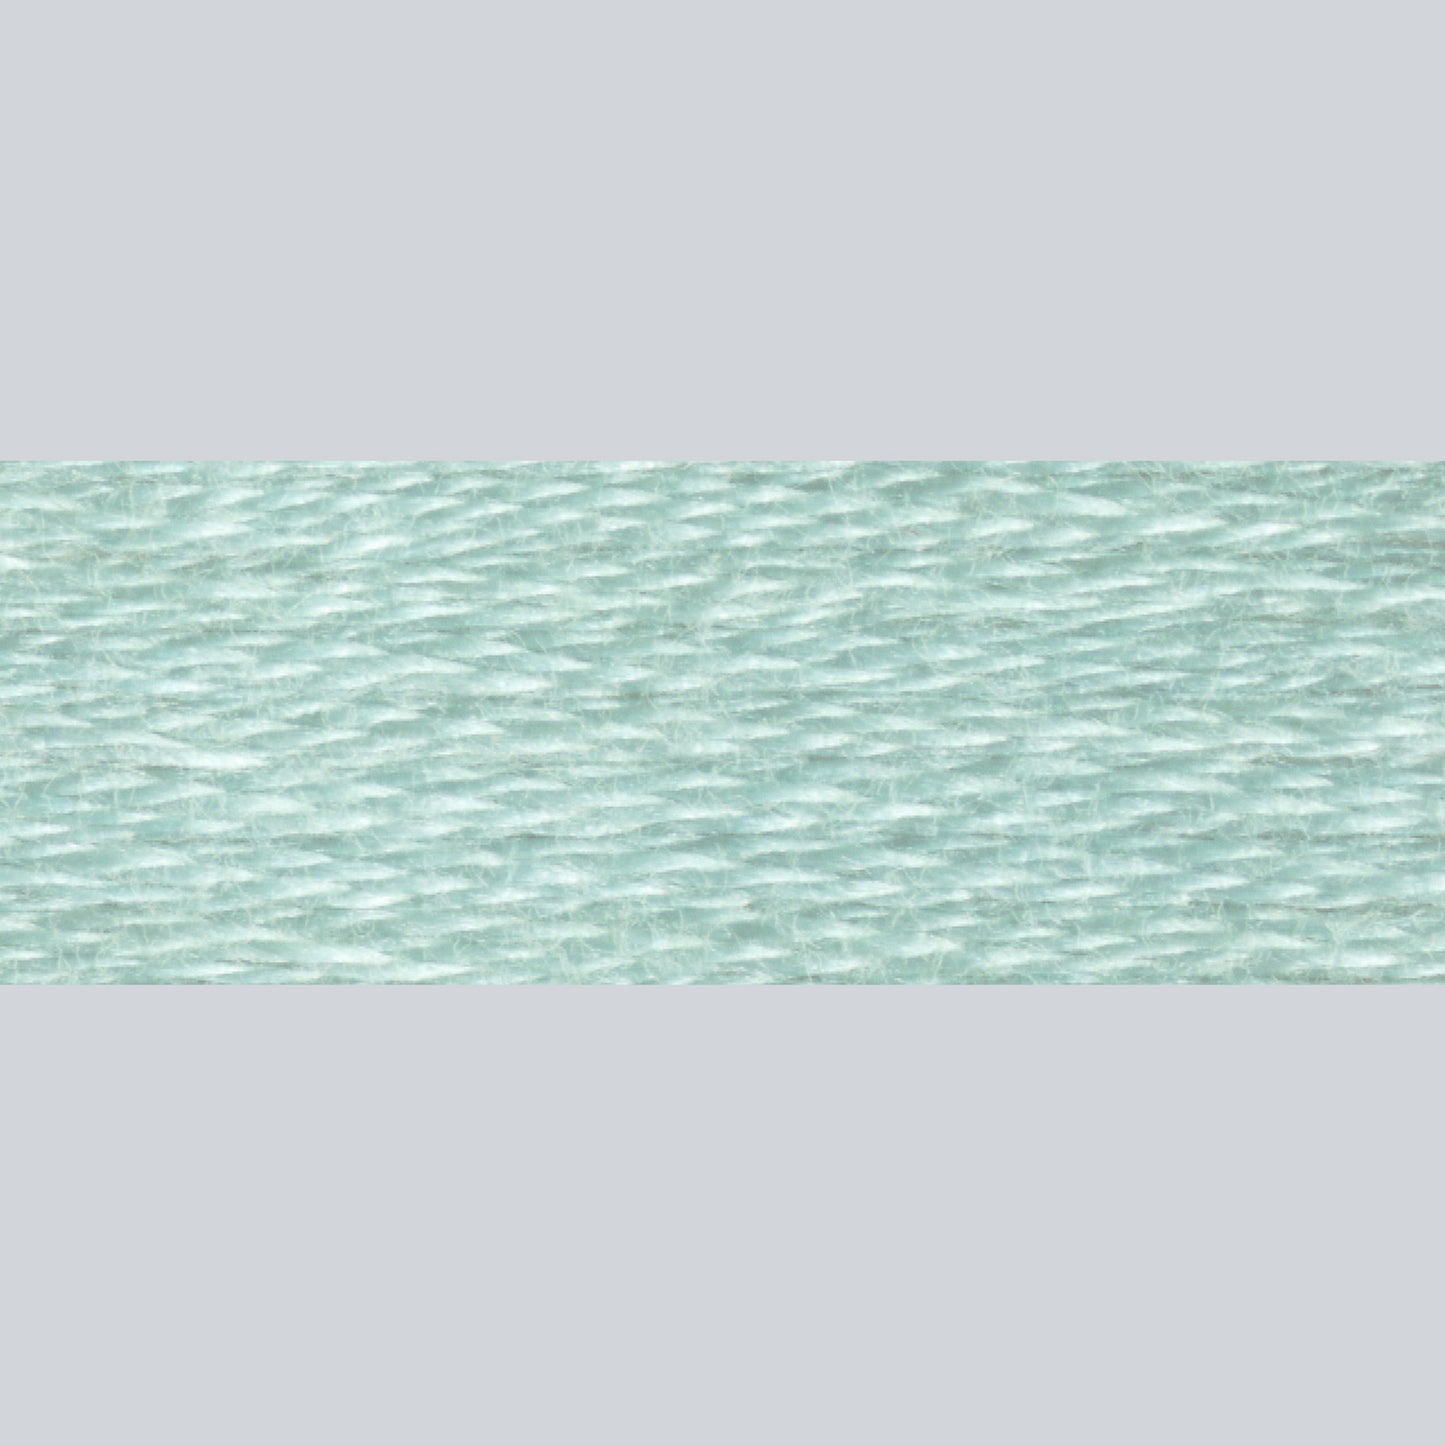 DMC Embroidery Floss - 598 Light Turquoise Alternative View #1